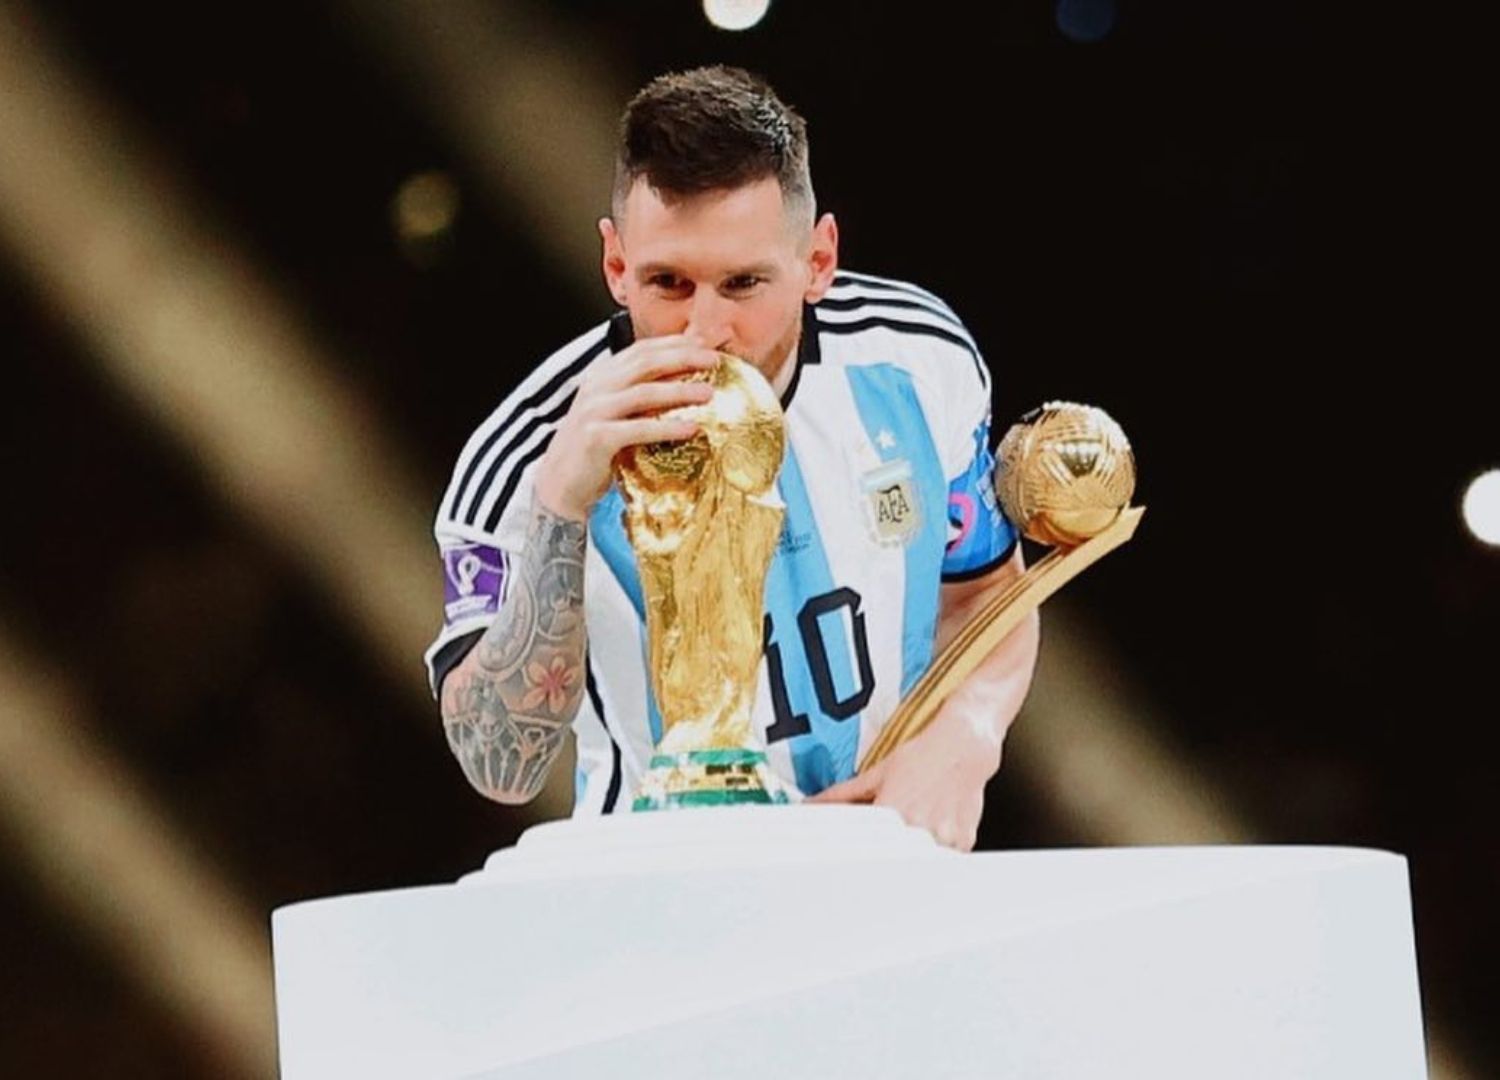 FIFA World Cup: Messi, Ronaldo pose over chessboard in paid